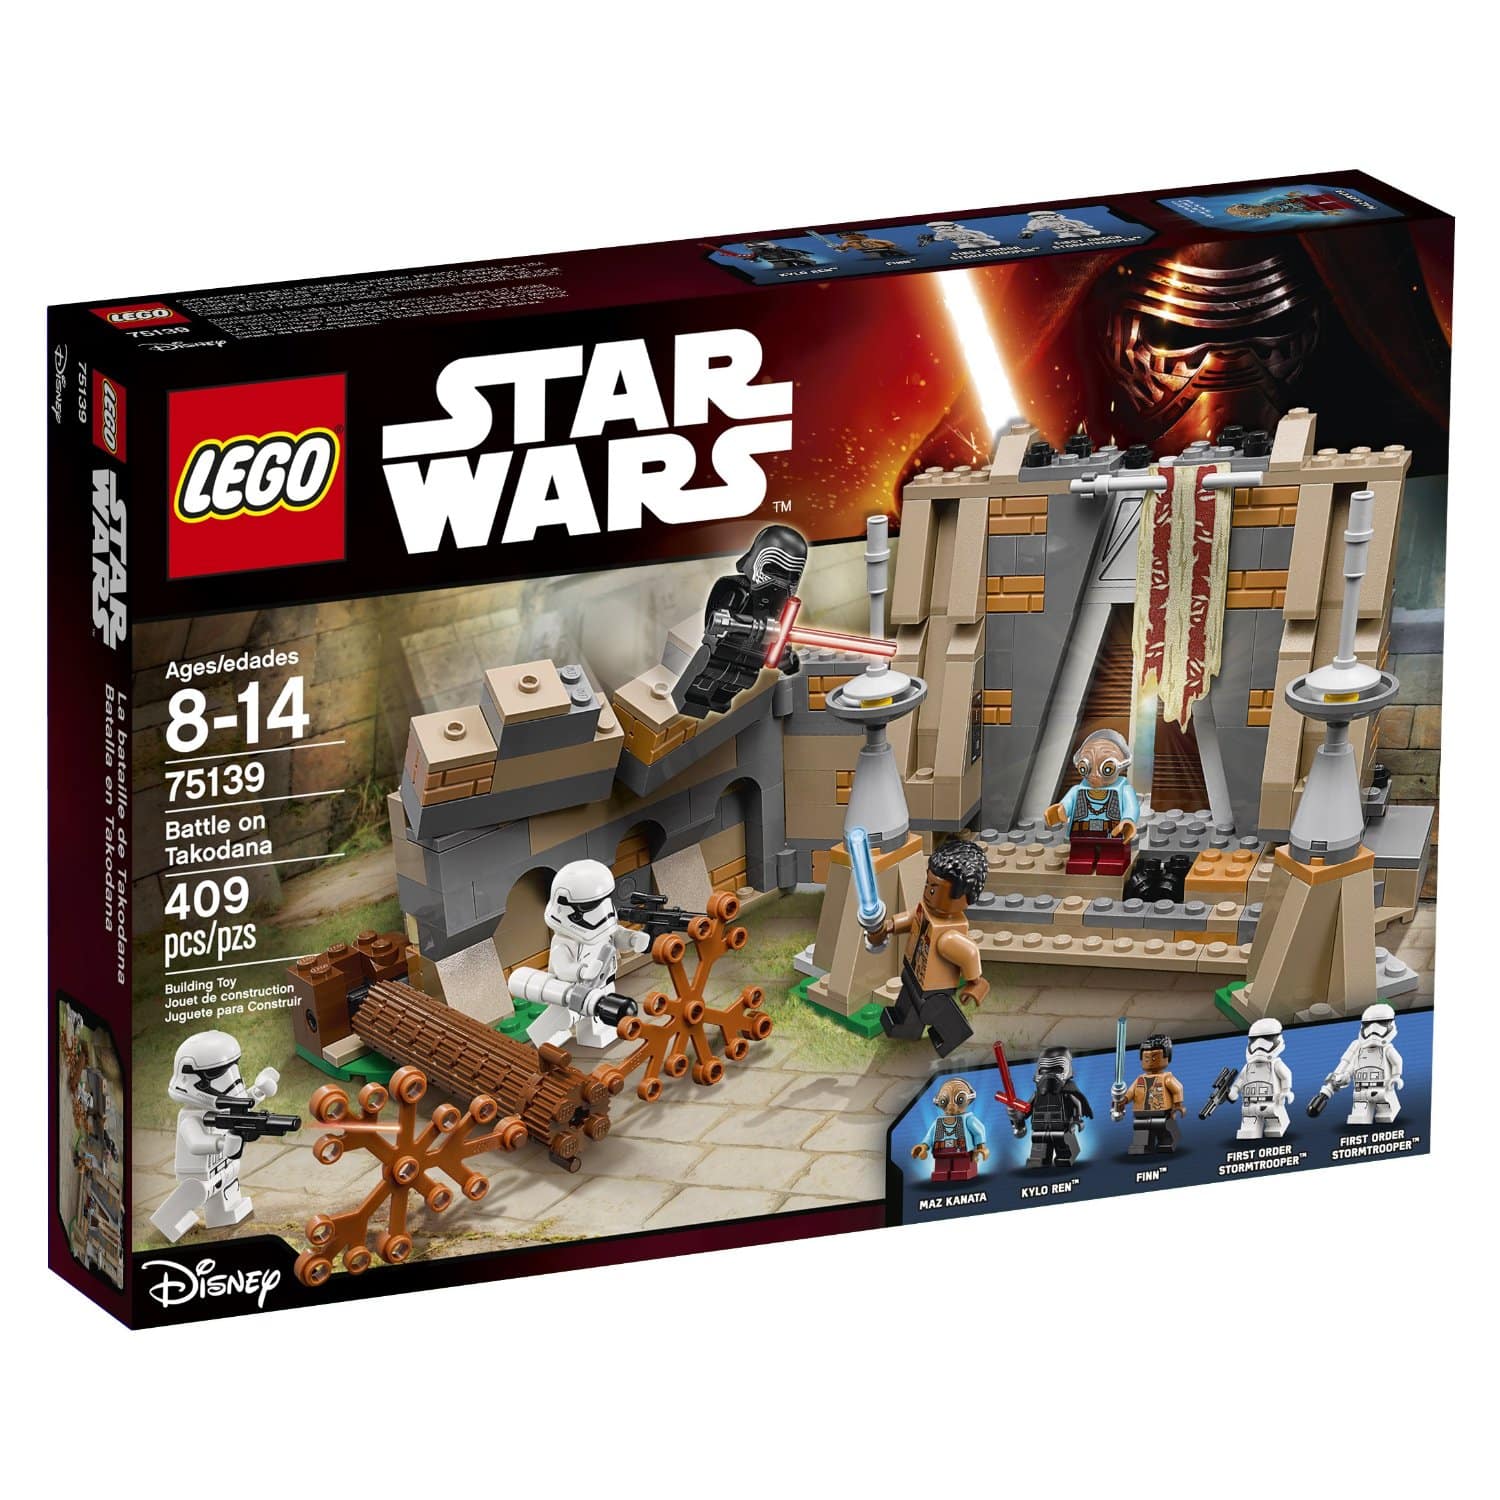 DEAL ALERT: Save up to 58% off Select Star Wars Items!!